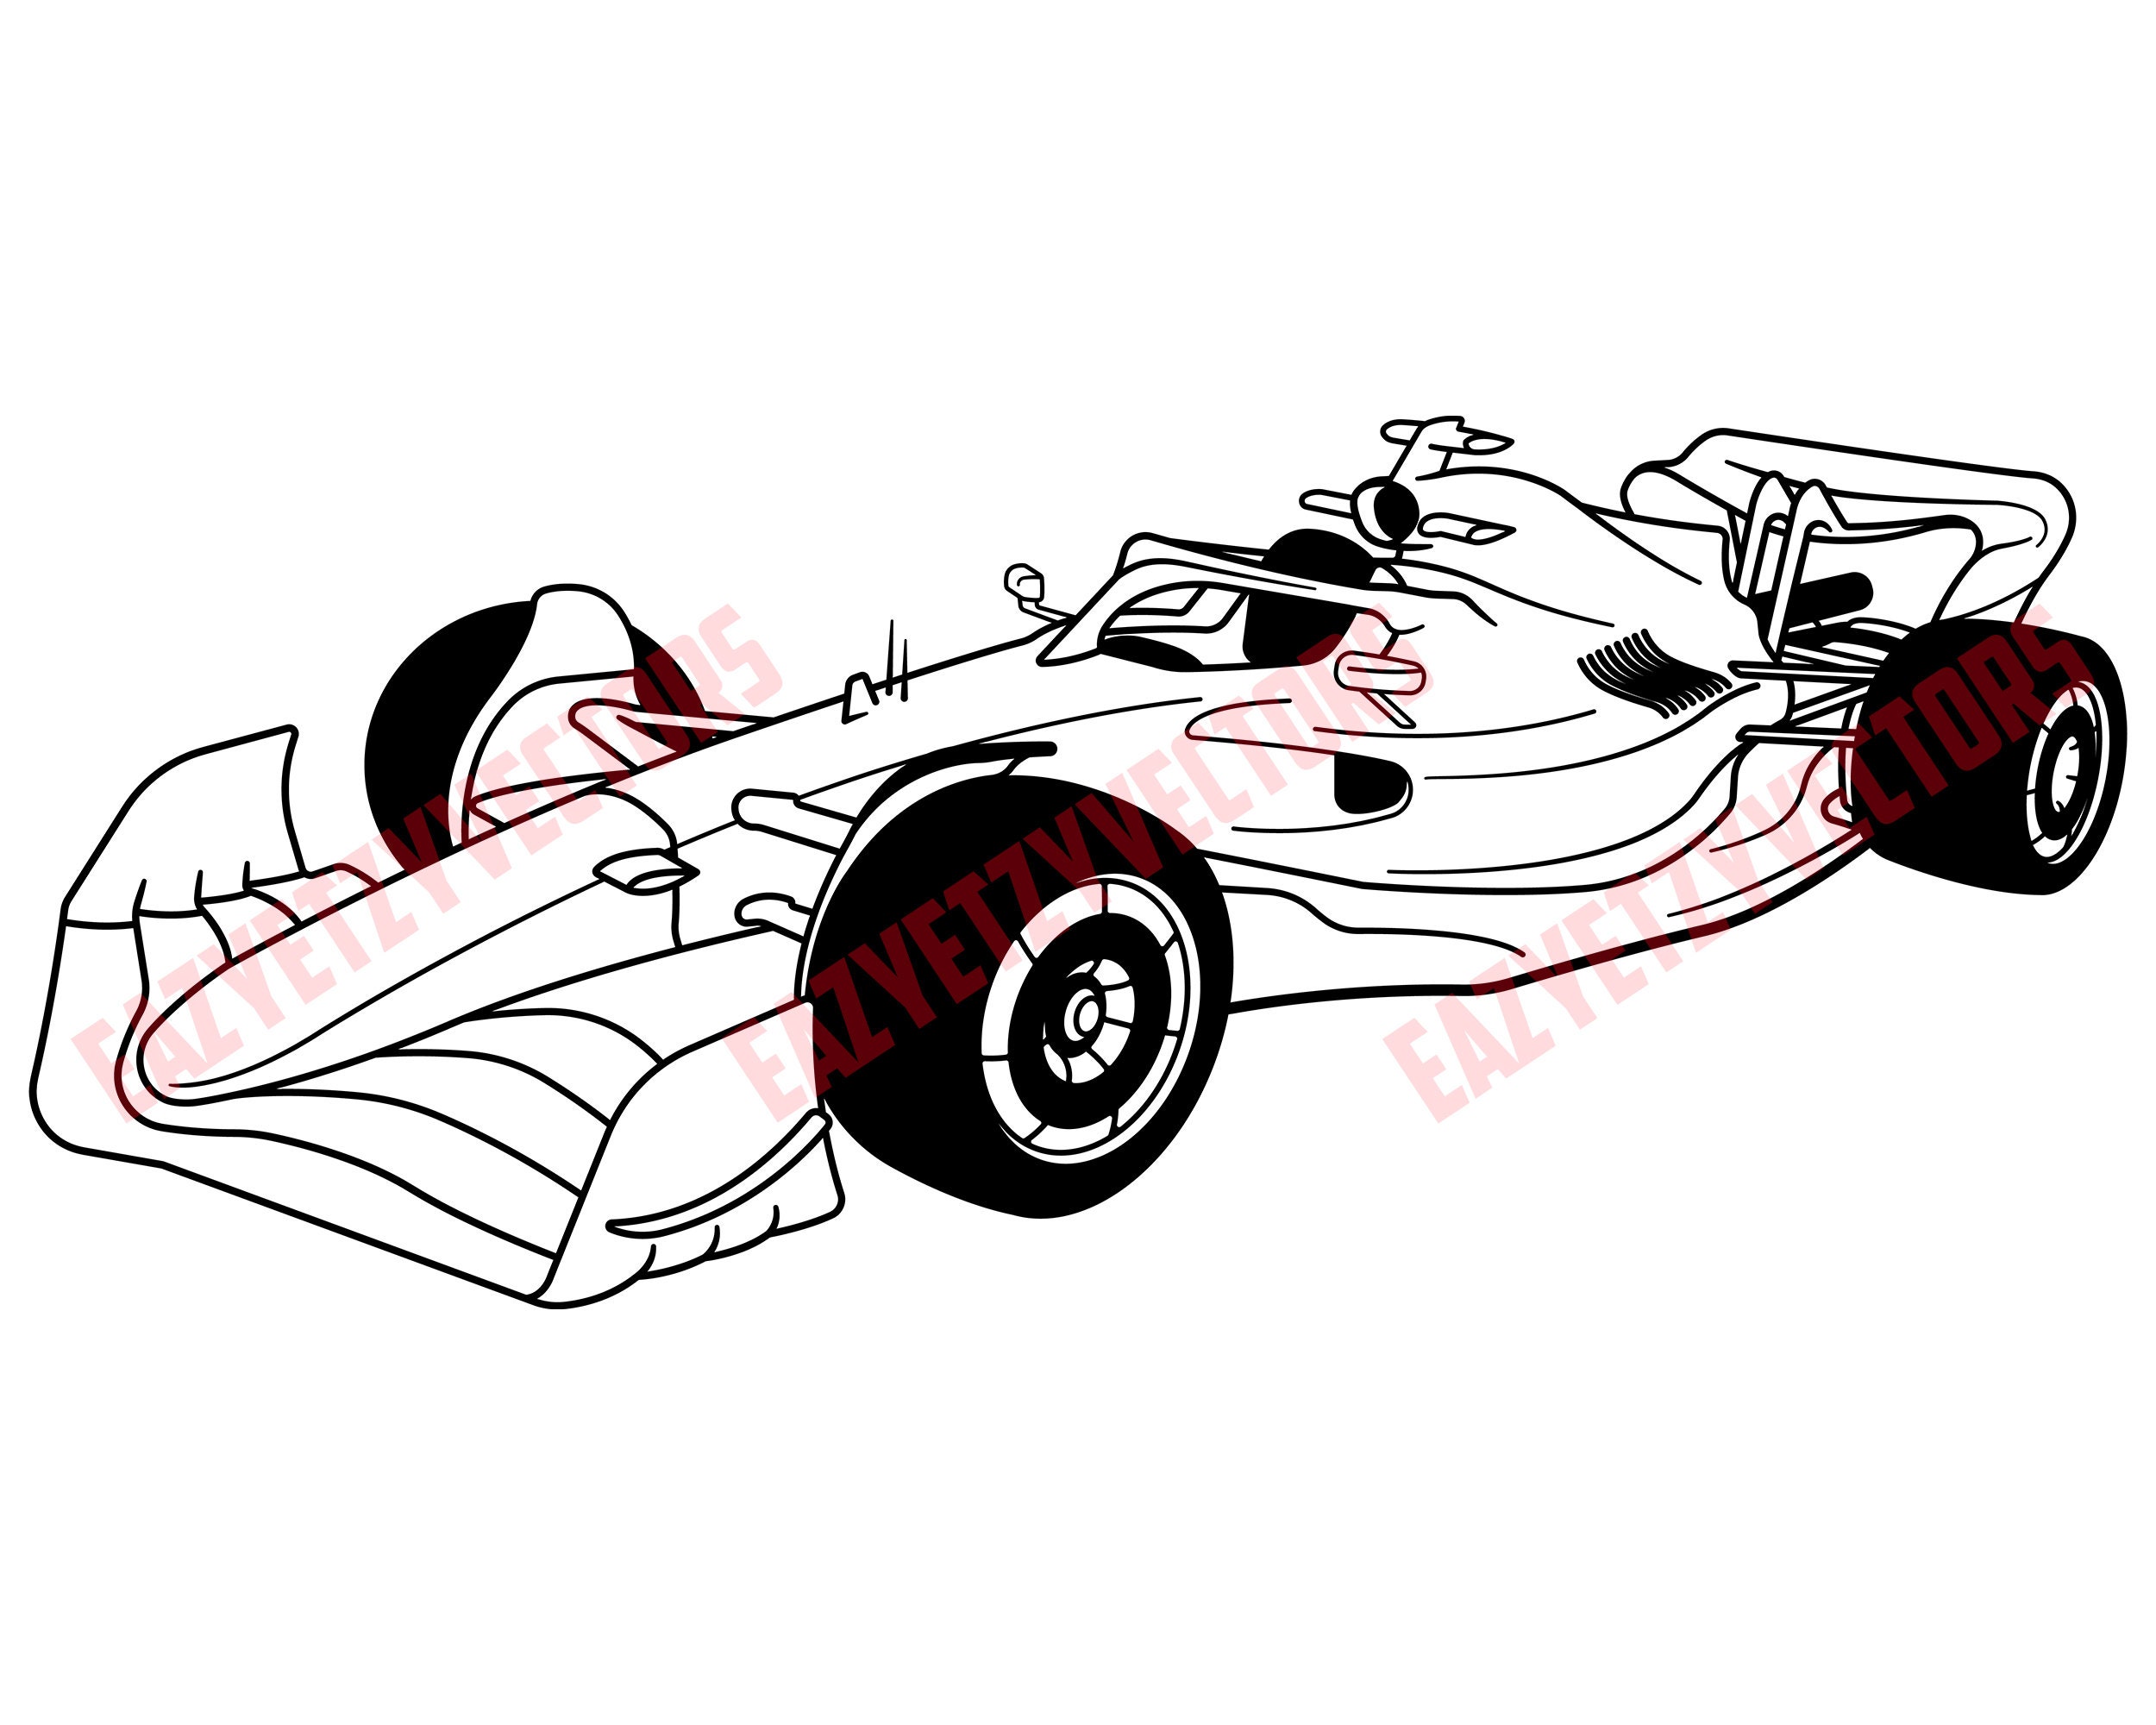 Drawing A Lotus F1 Car For A Magazine Article Isnt As Simple As It Sounds